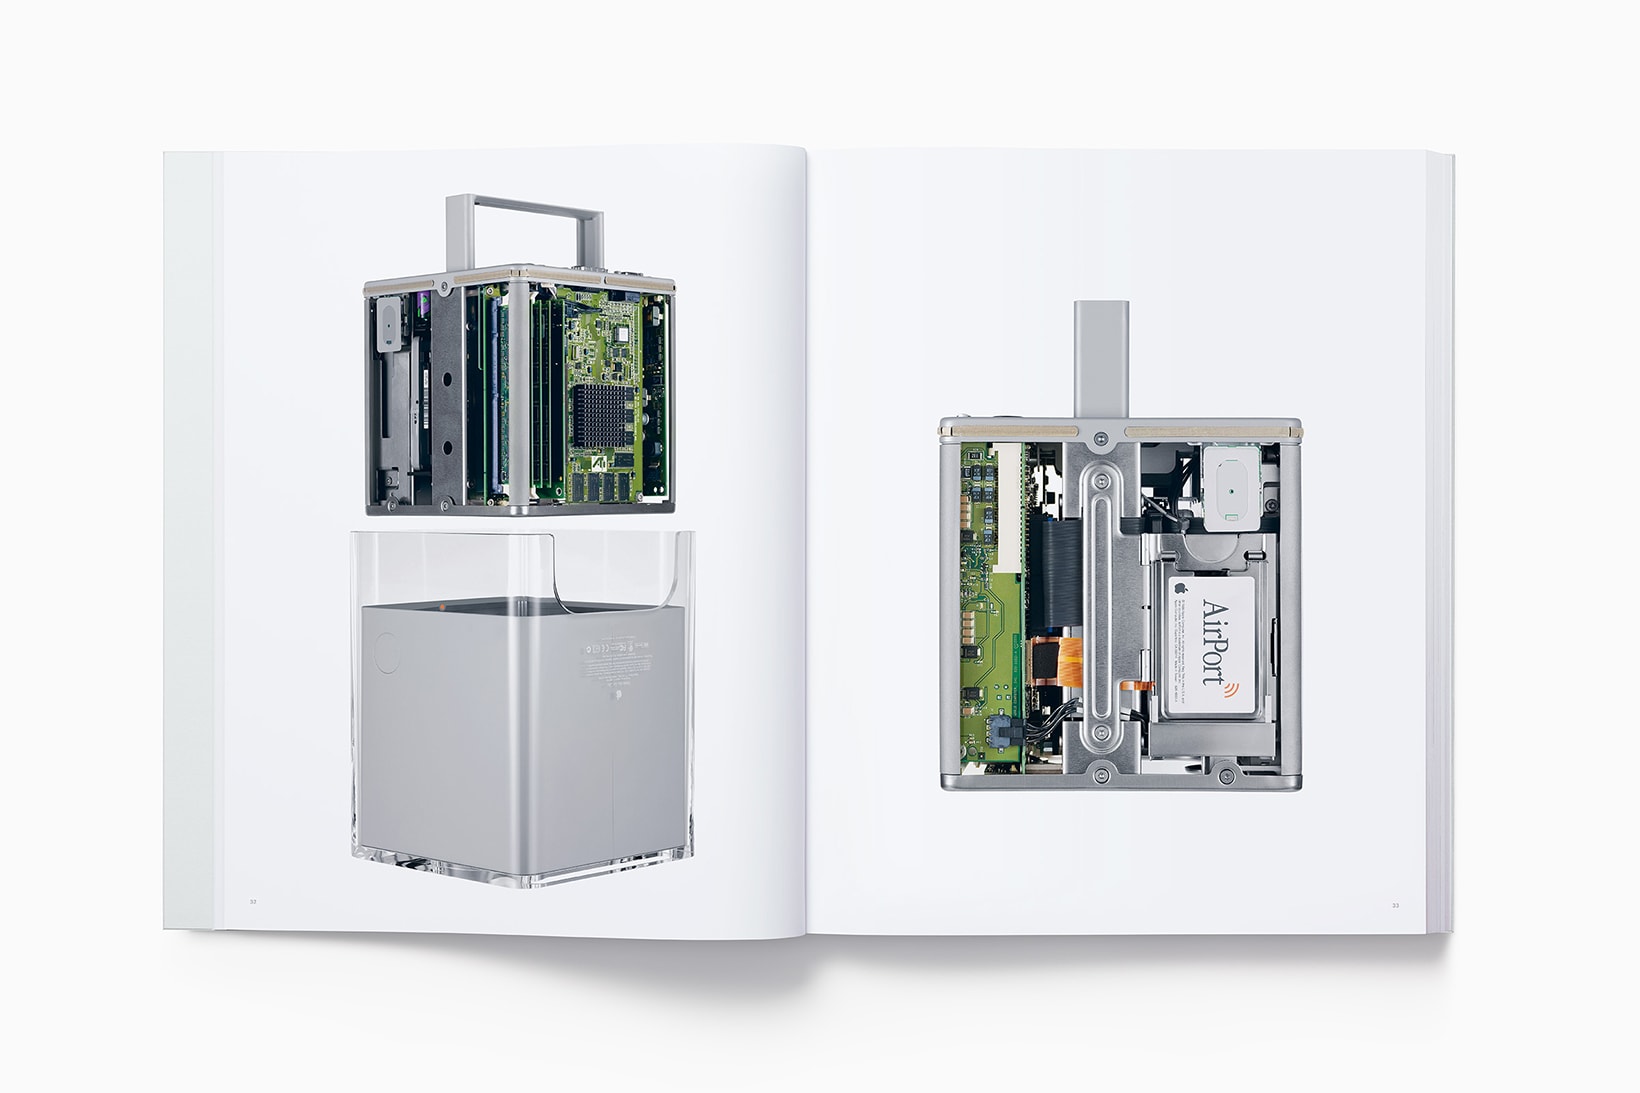 Designed by Apple in California Coffee Table Photo Book